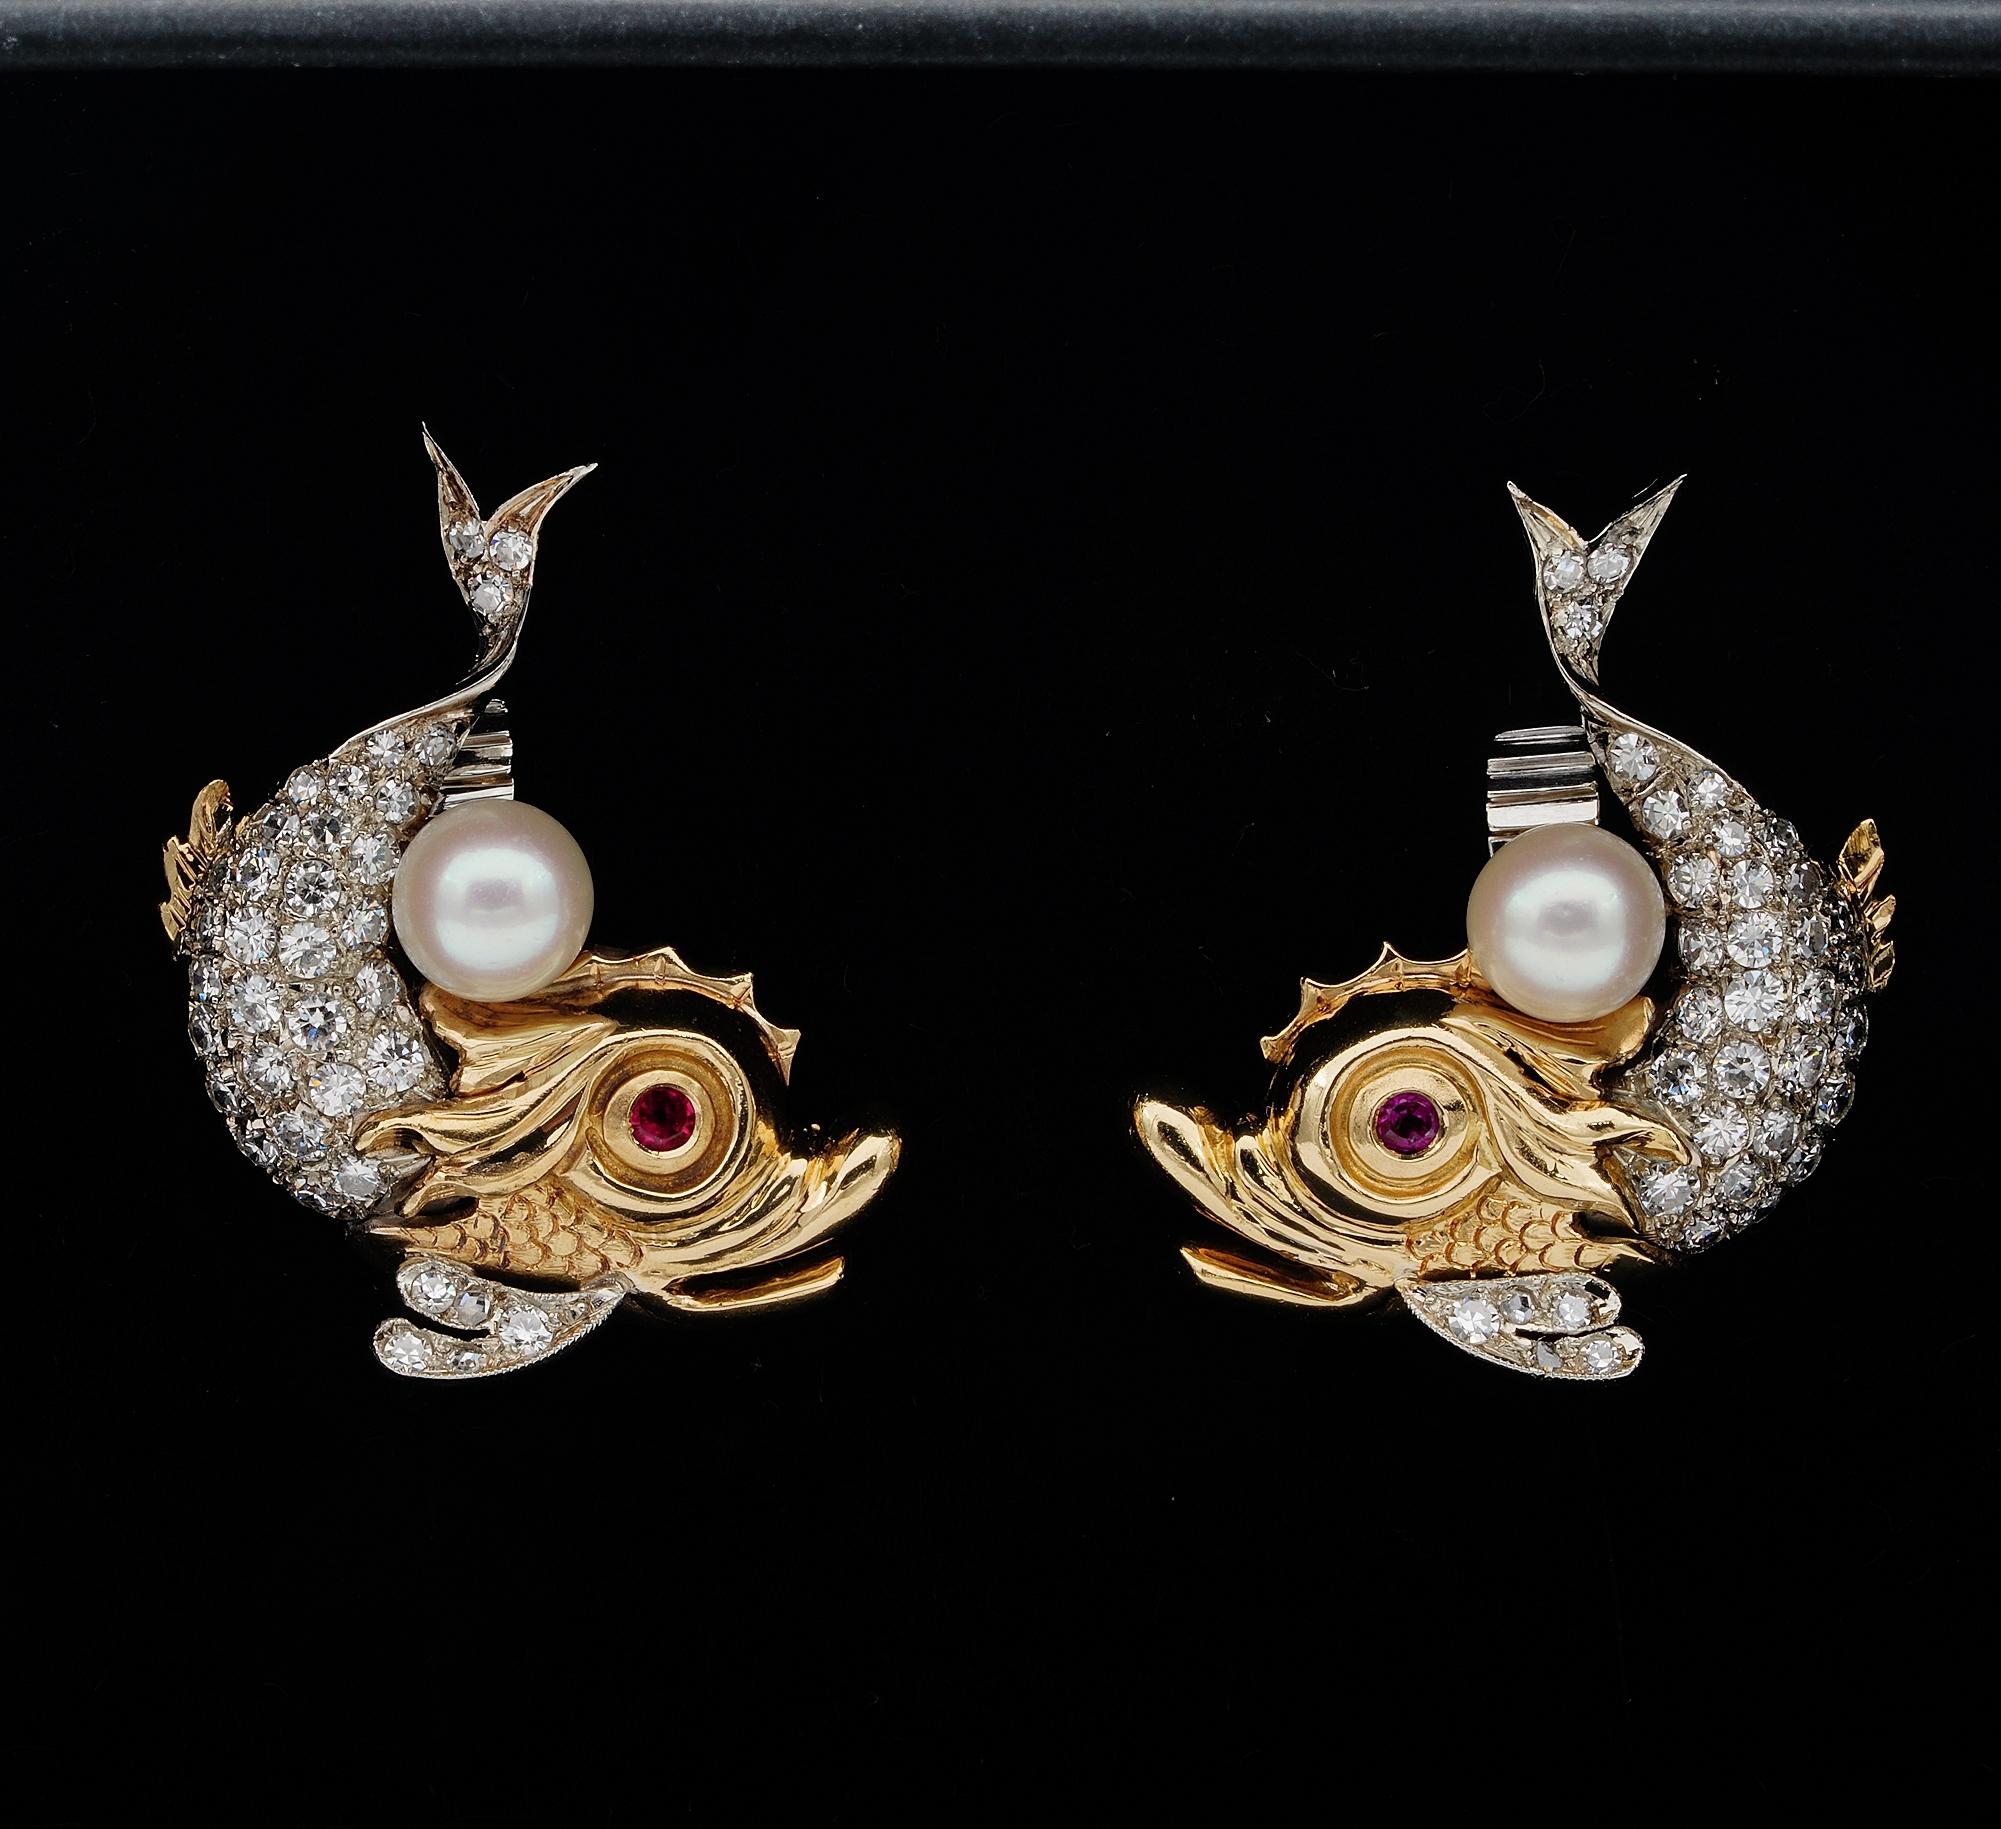 Defiantly different, drawn to the unusual, stunning pair of Vintage earrings of rare Dolphin design, renaissance inspired, 1940 ca
Hand crafted as unique in an extremely fine manner of solid 18 kt gold, they have a net contrast between the gold